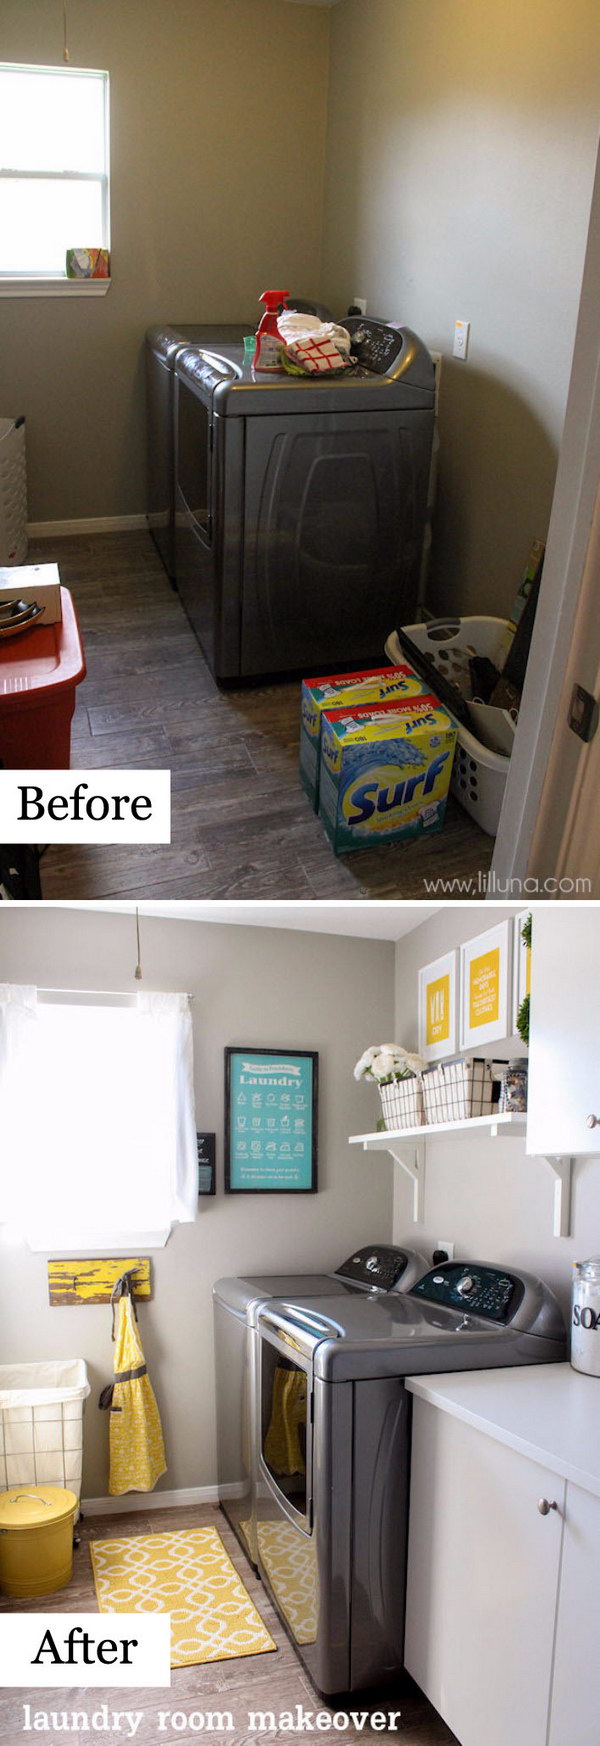 Laundry Room Reveal With a Brighter Wall Paint, Cheery Hints of Yellow, and a Handy Wall-mounted Shelf. 